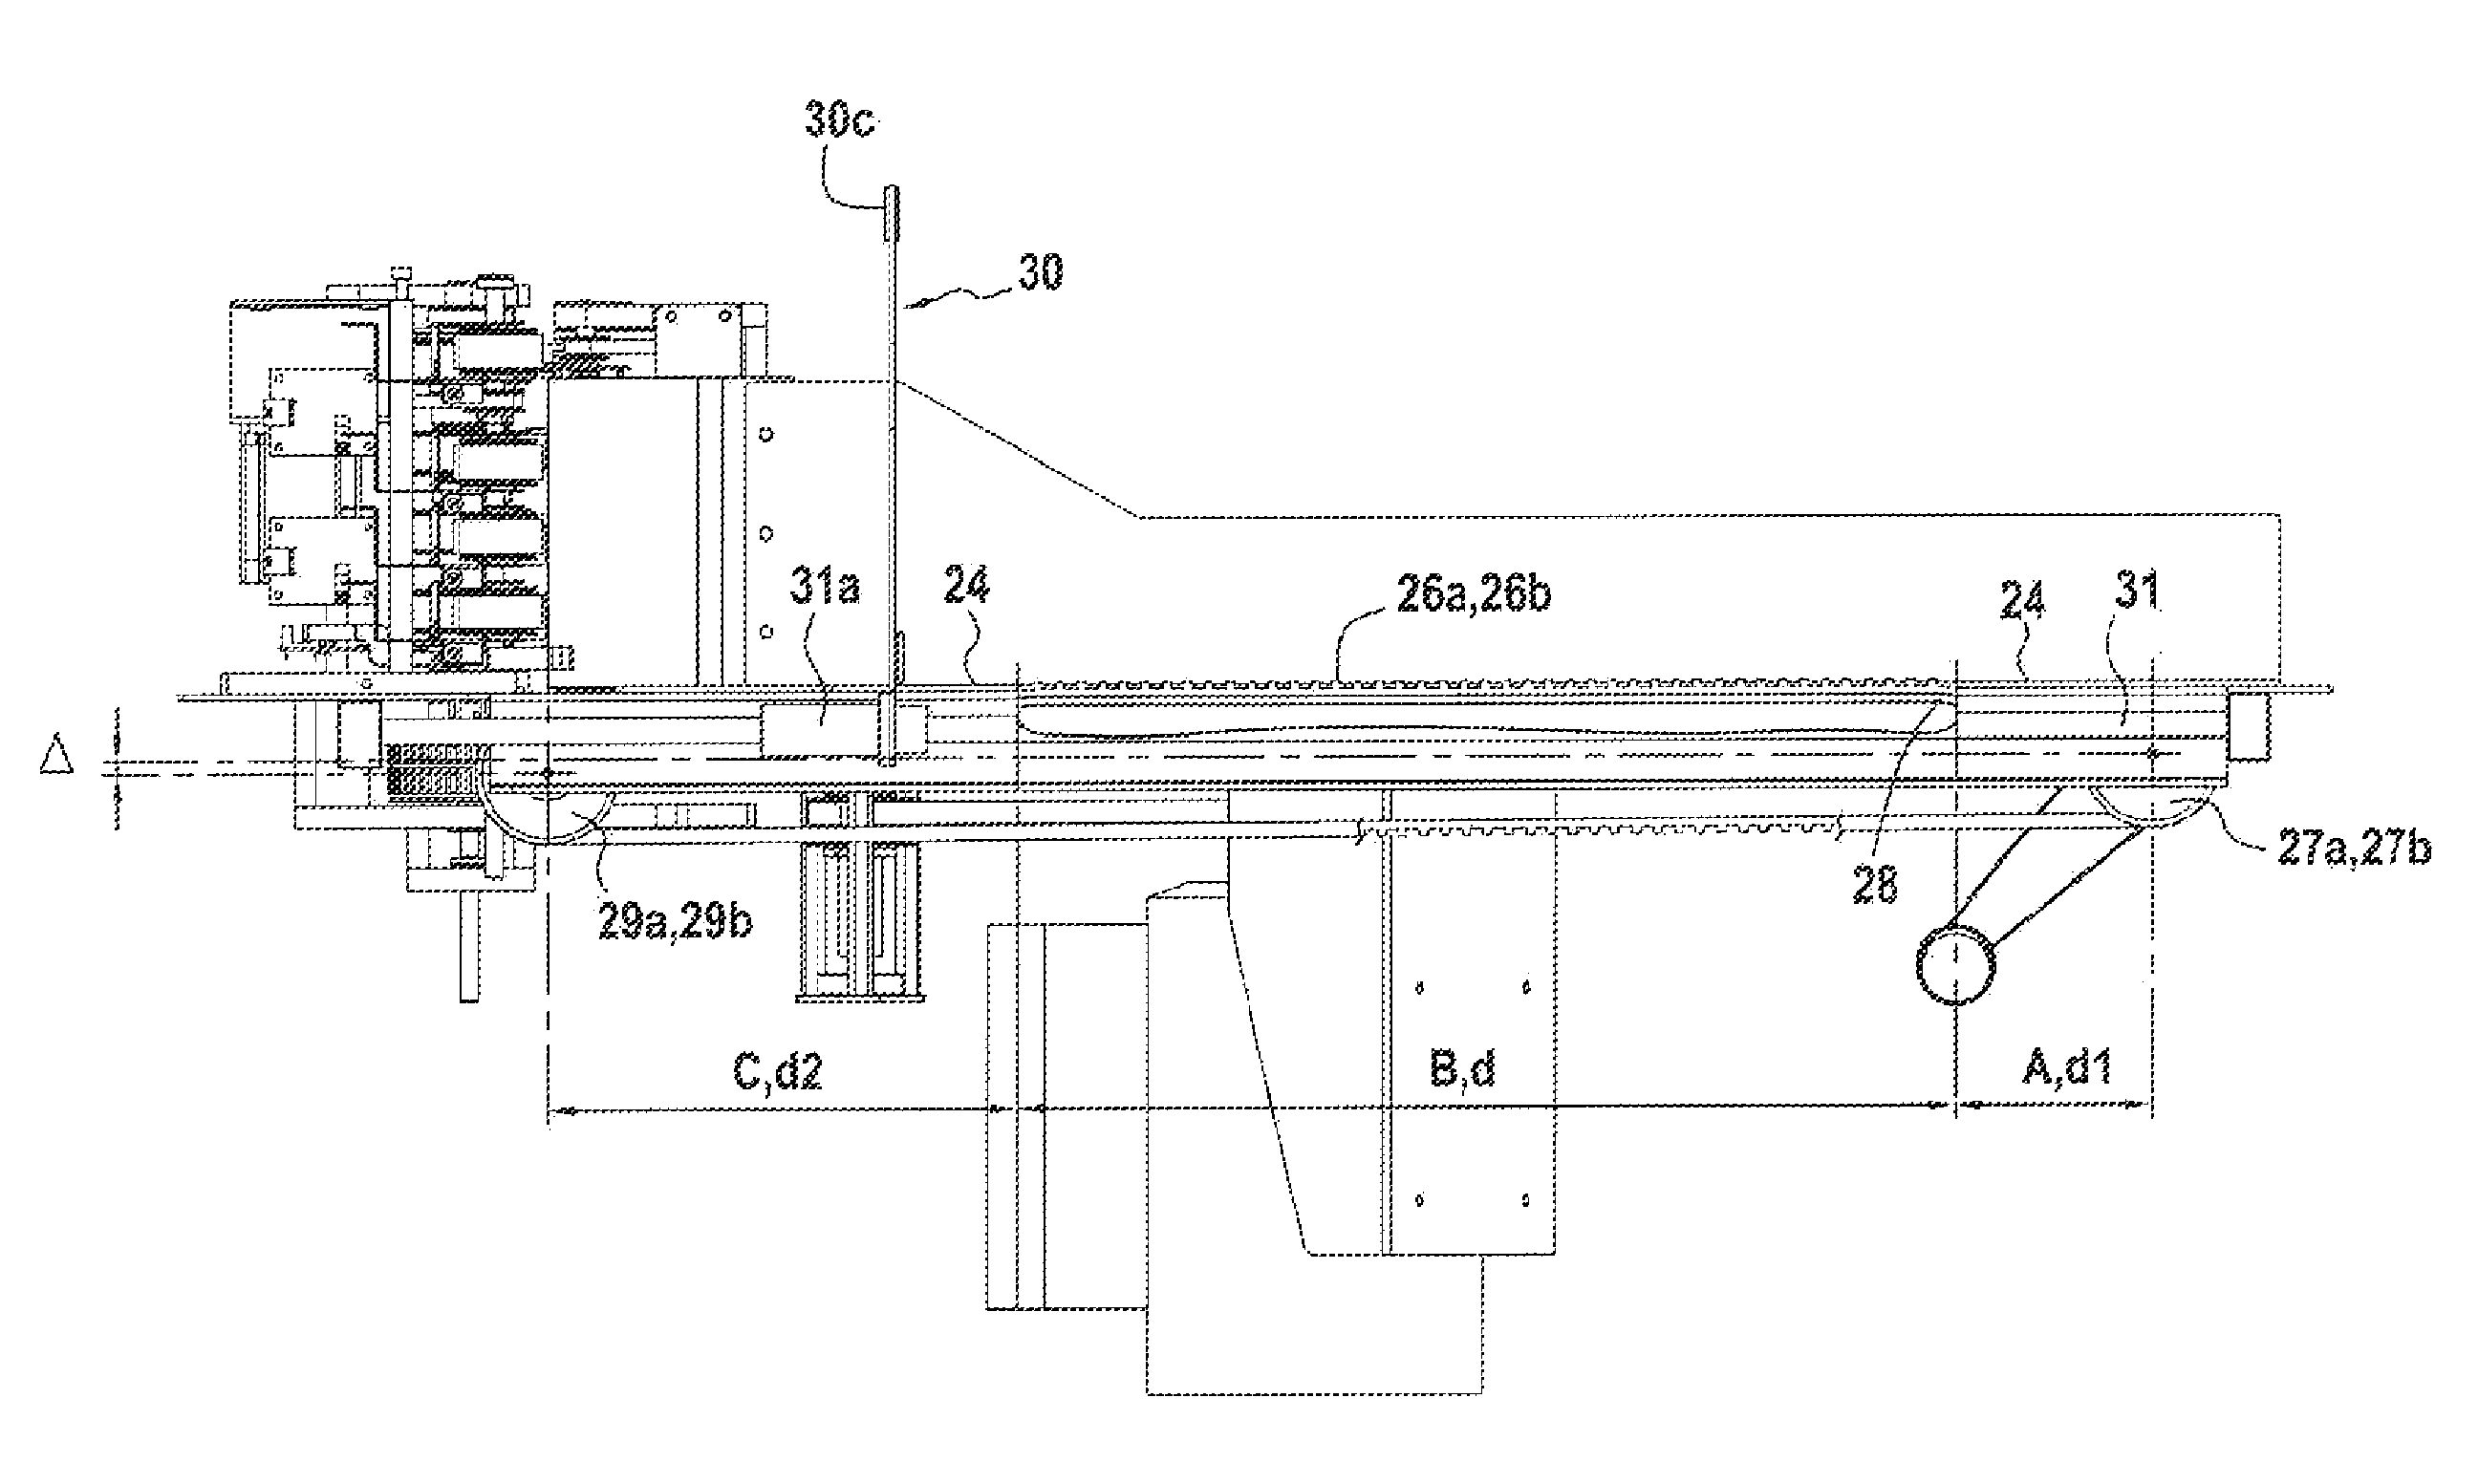 Feeding apparatus for flat items processed in a mail sorting machine with pulleys located under transport deck